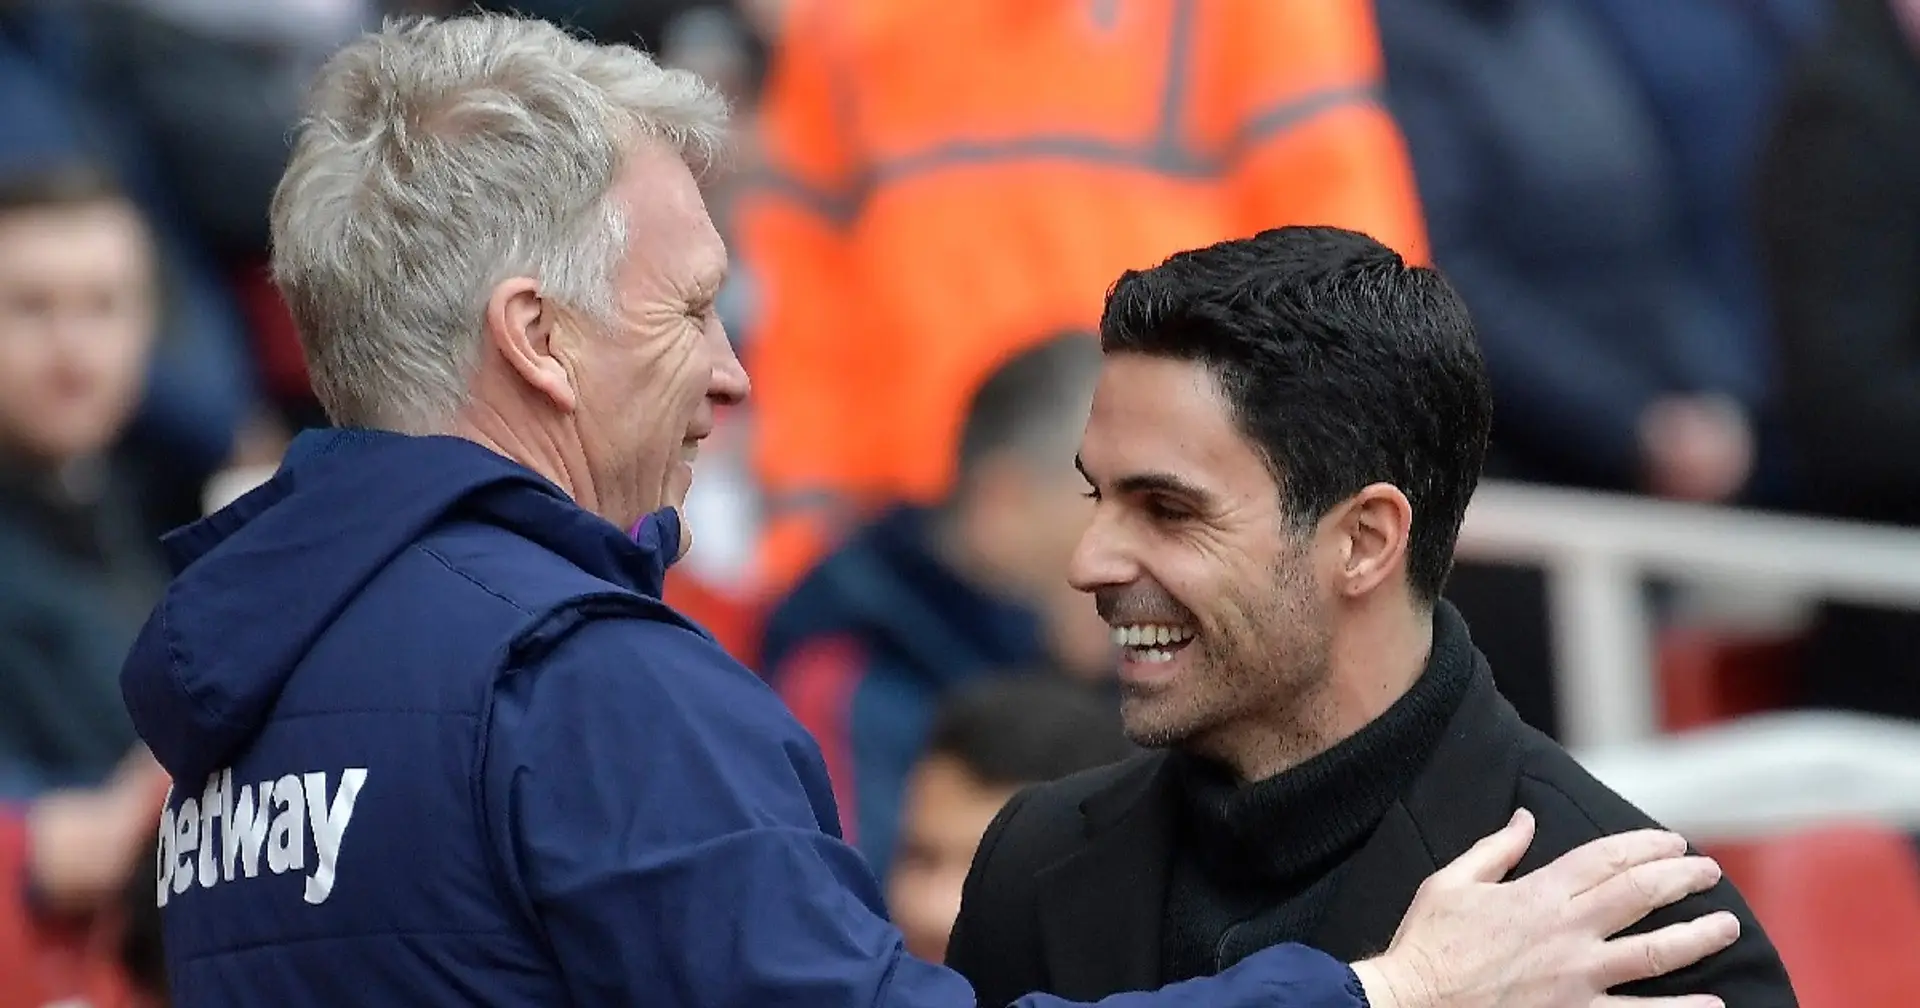 Moyes names two managers behind Arteta's success - one is Guardiola 